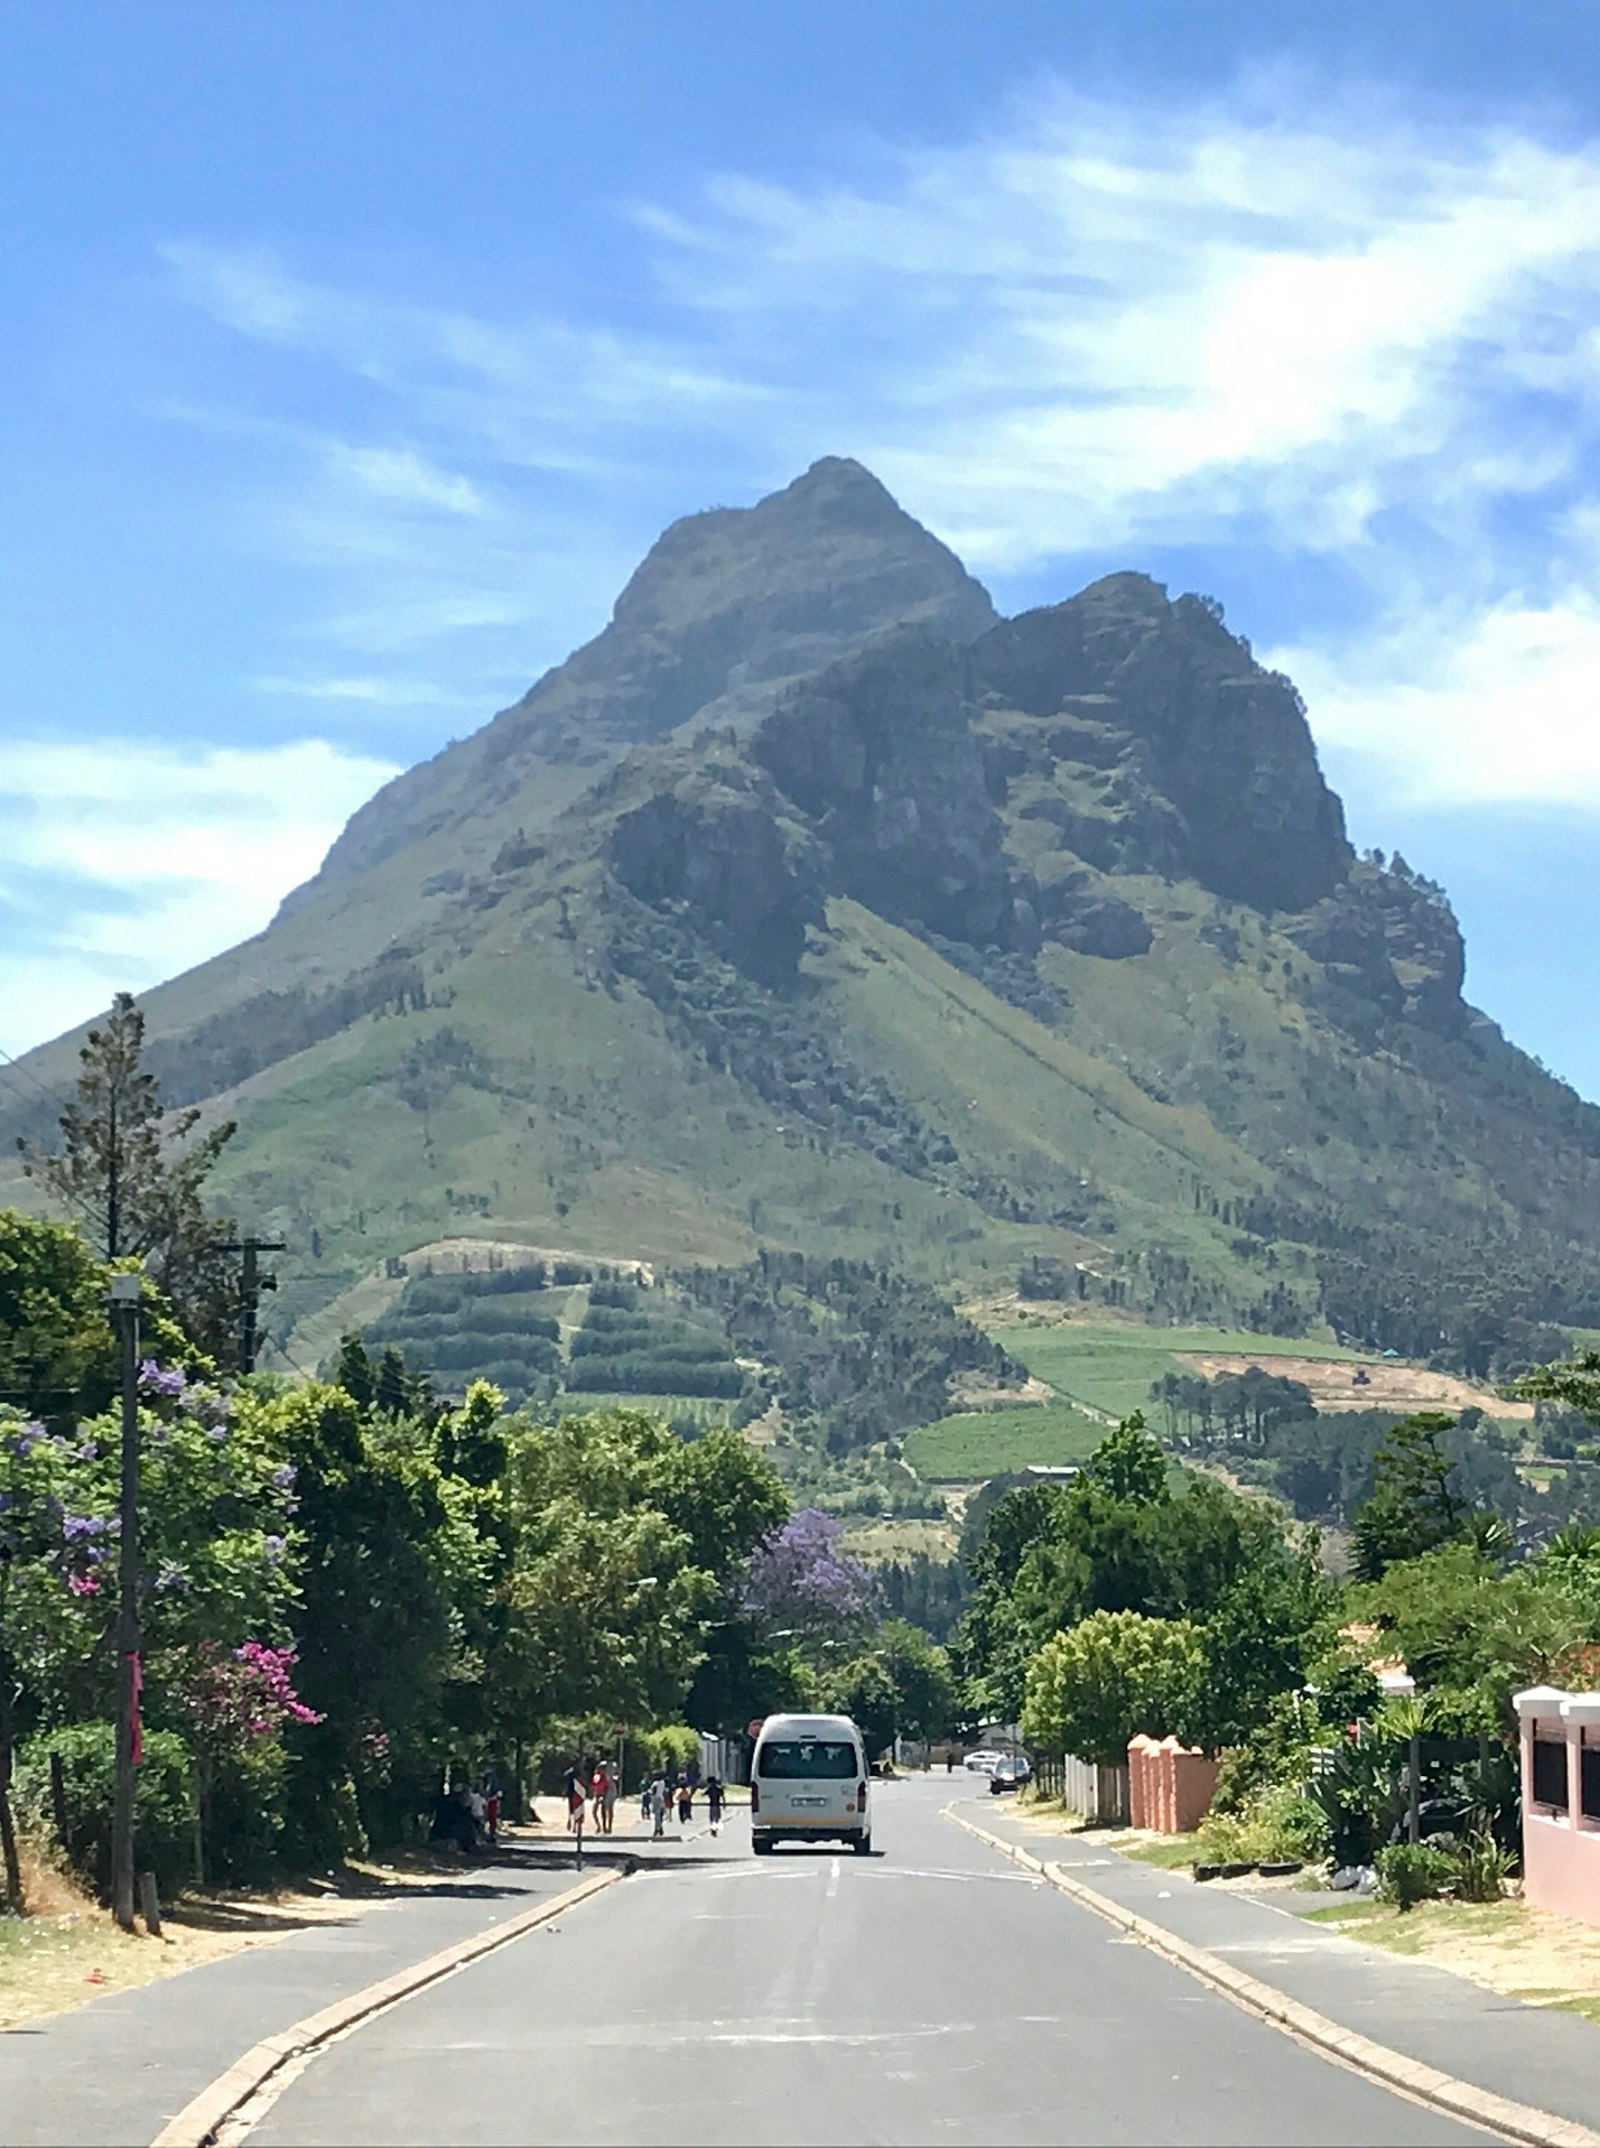 This portrait-shaped image is looking down a tree-lined road in Kylemore to the towering, green-covered mountain of Simonsberg © Simon Richmond / Lonely Planet